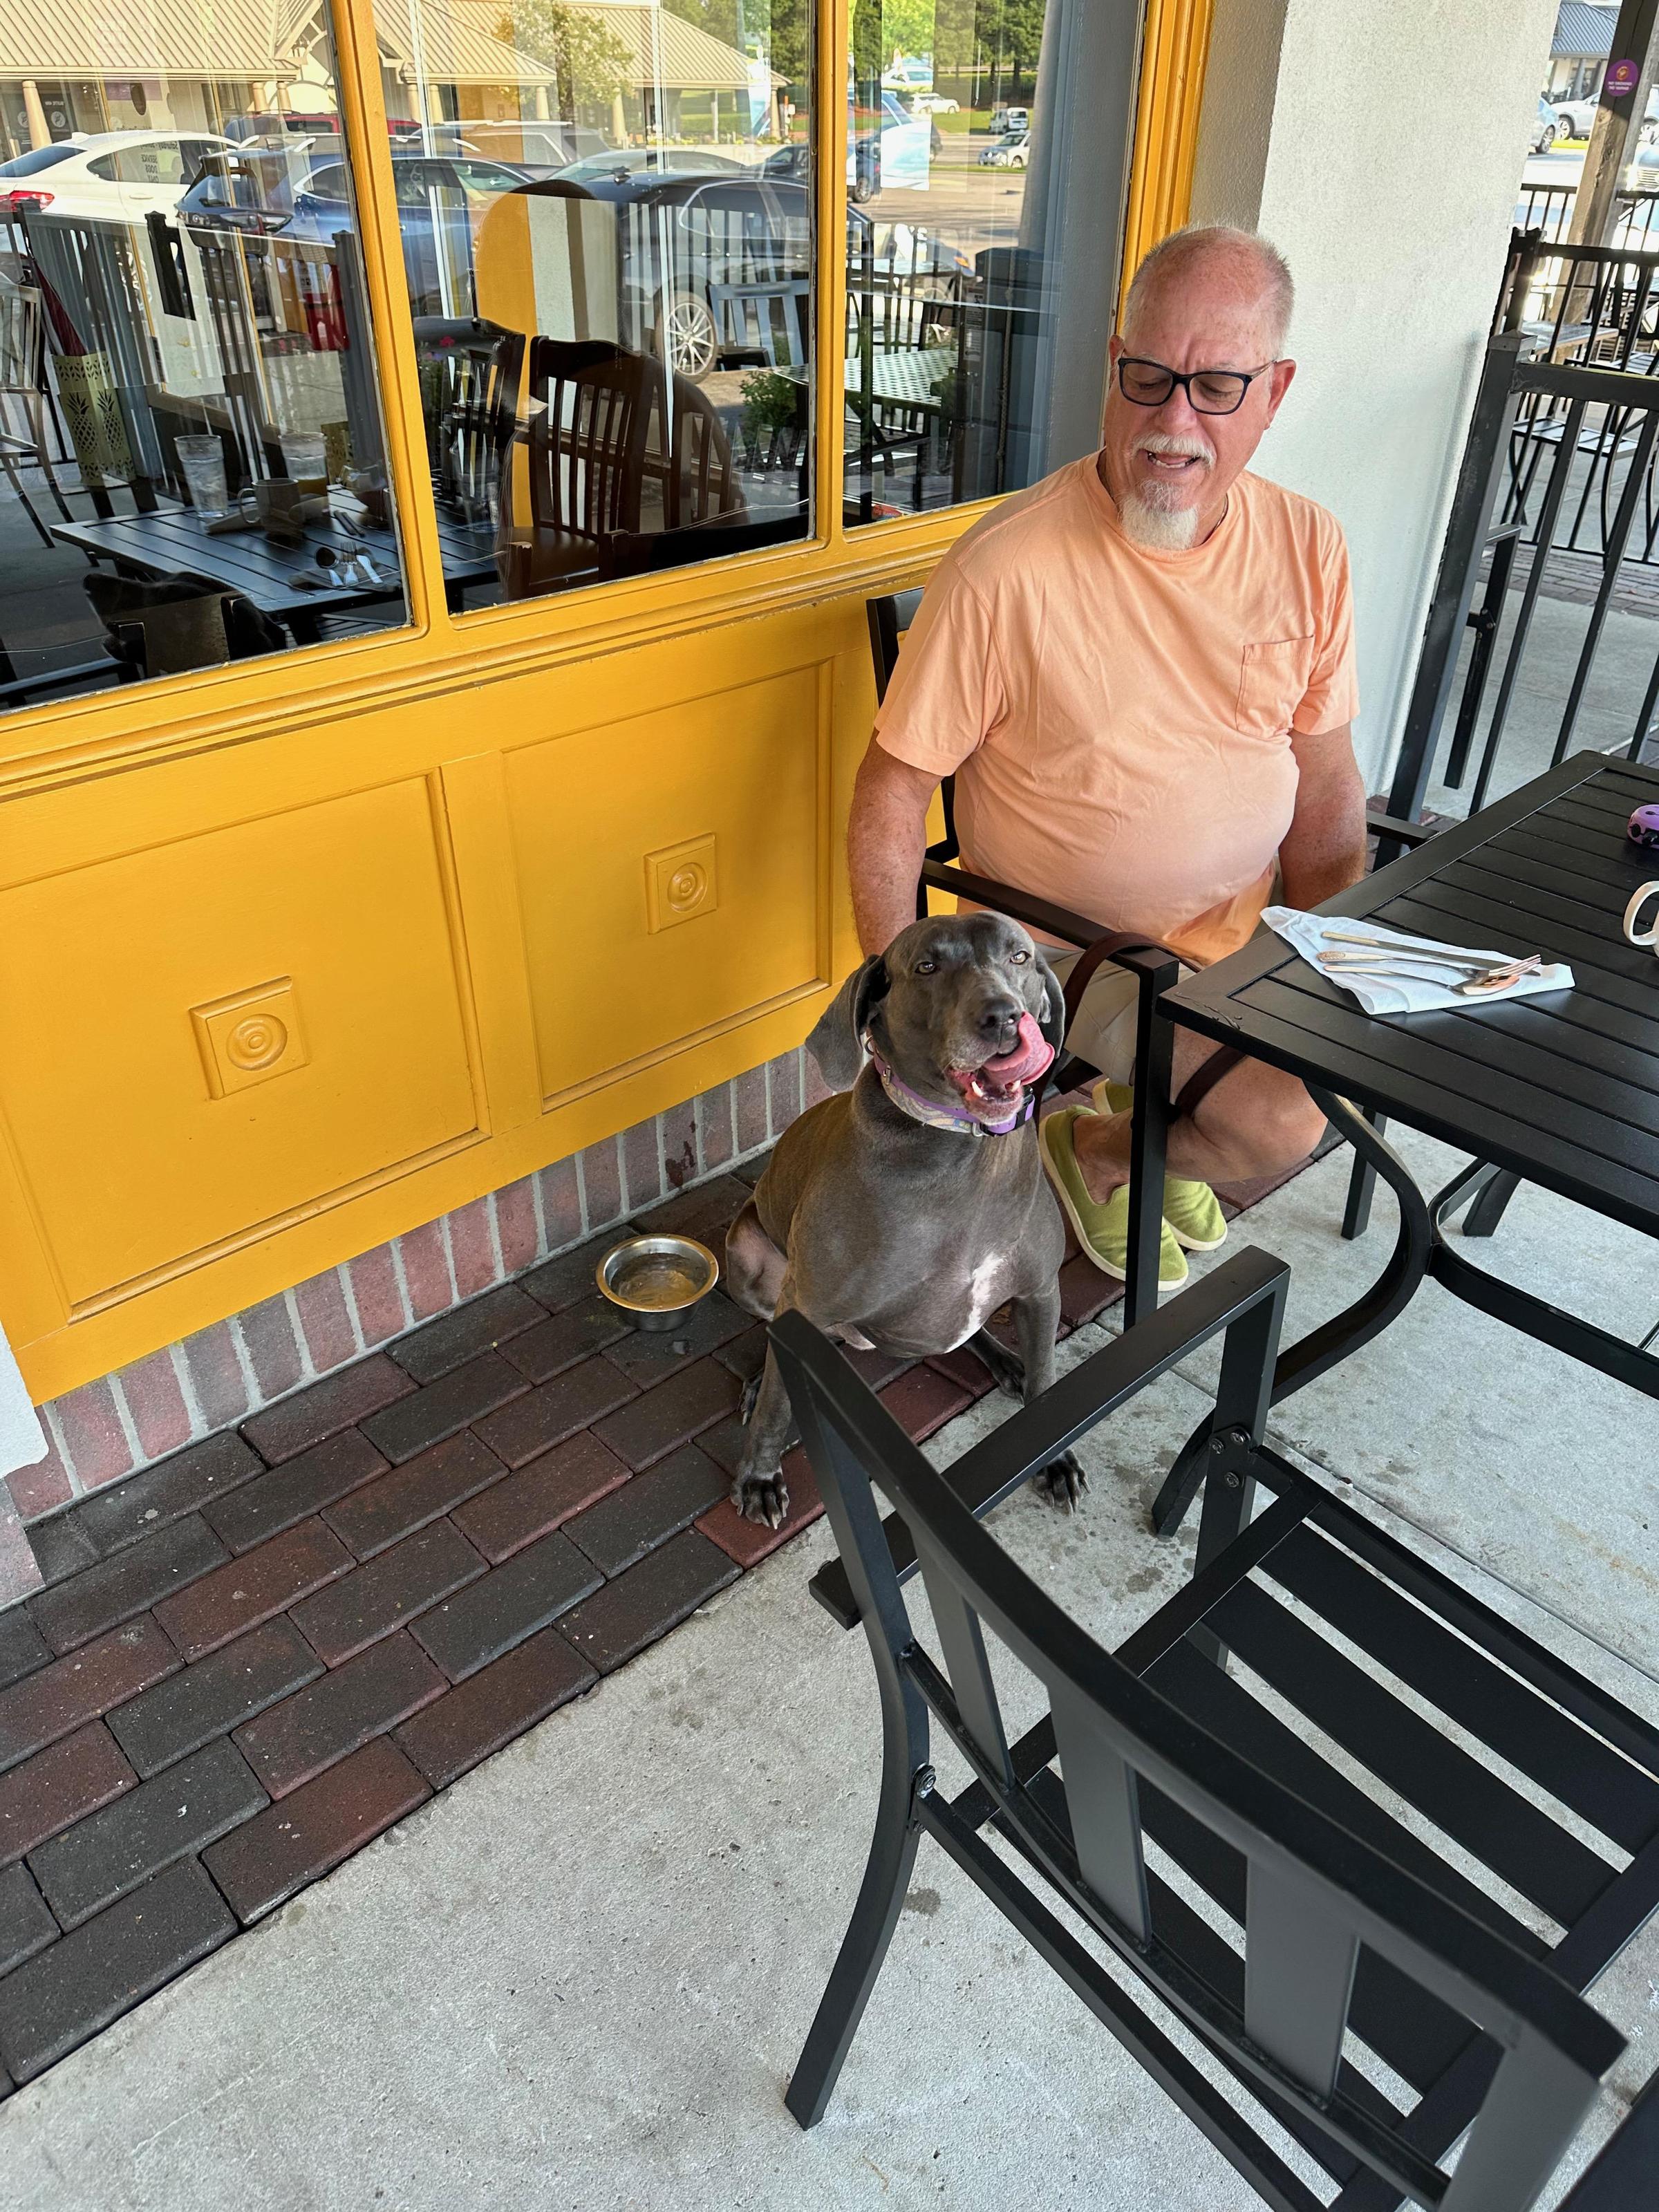 Pet Friendly The Flying Biscuit Cafe